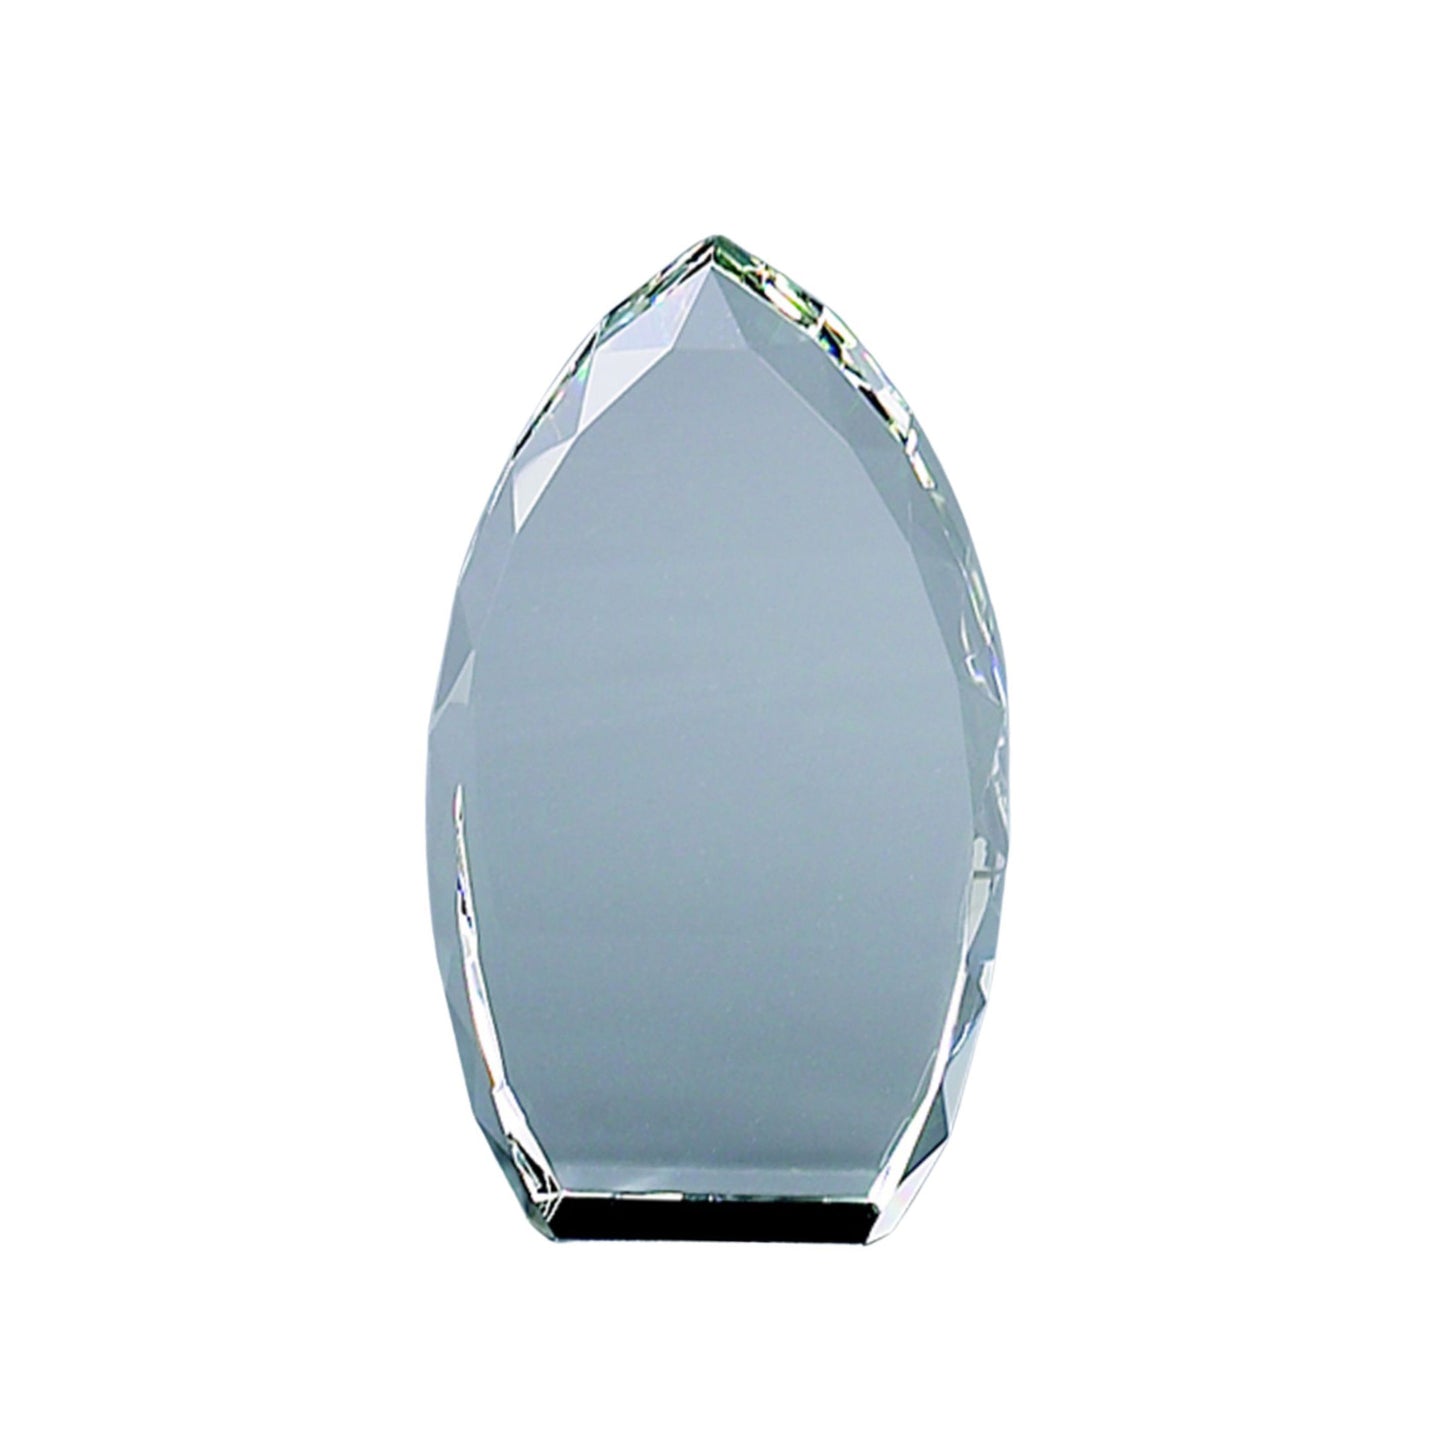 Optic Crystal Trophy Point, 5" Ht